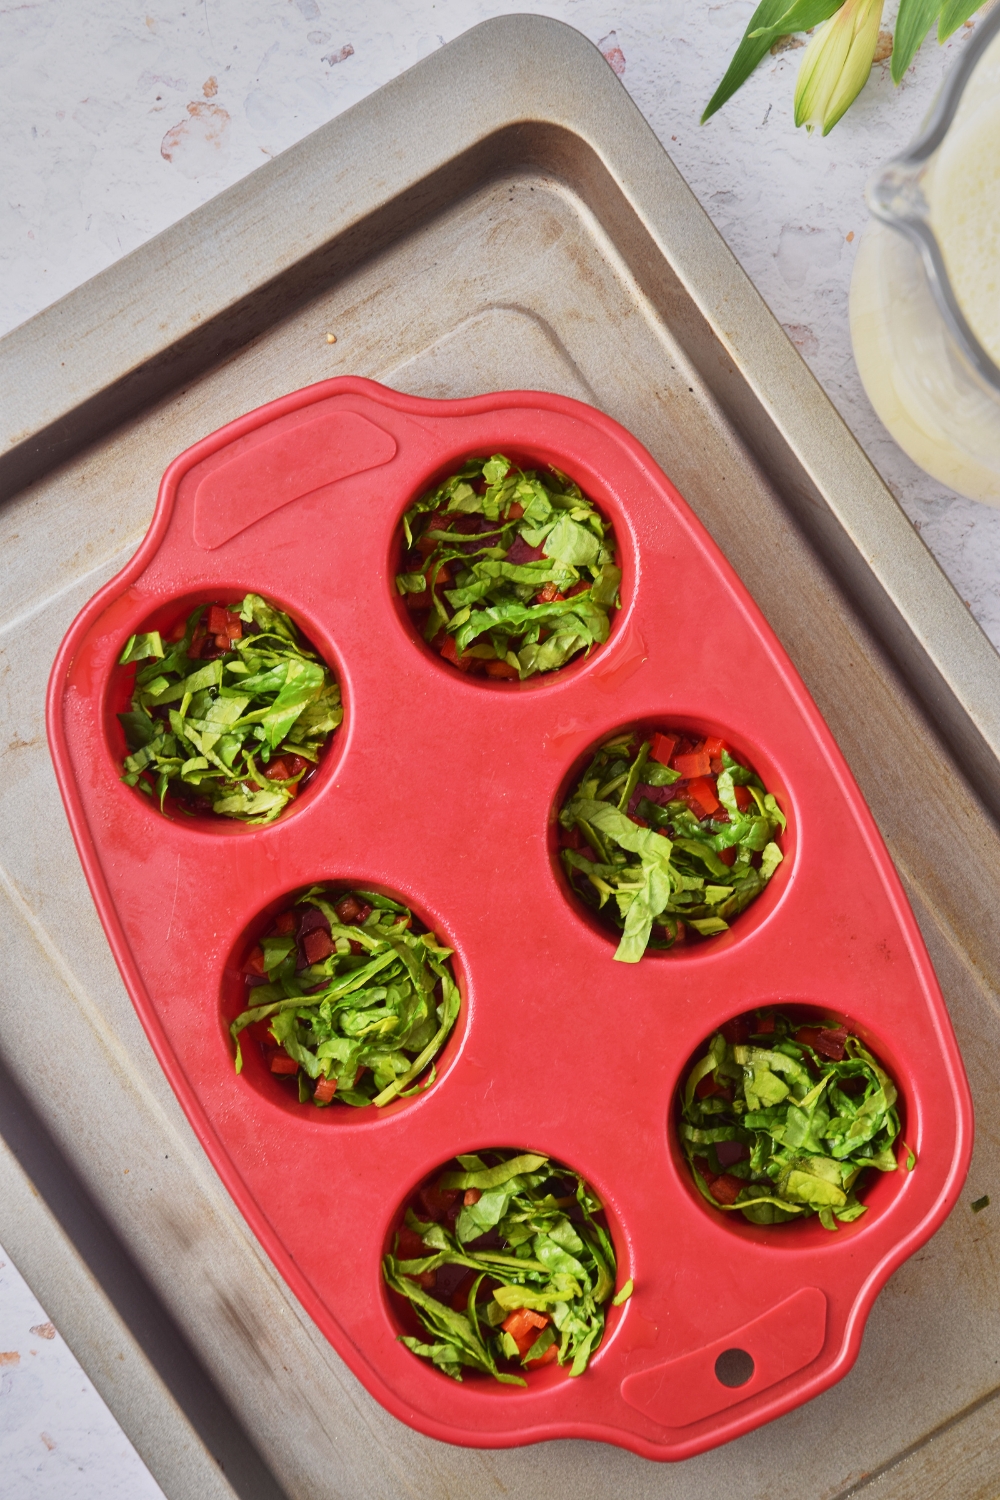 A baking sheet with a silicone muffin mold. Each mold has spinach and red peppers in it.